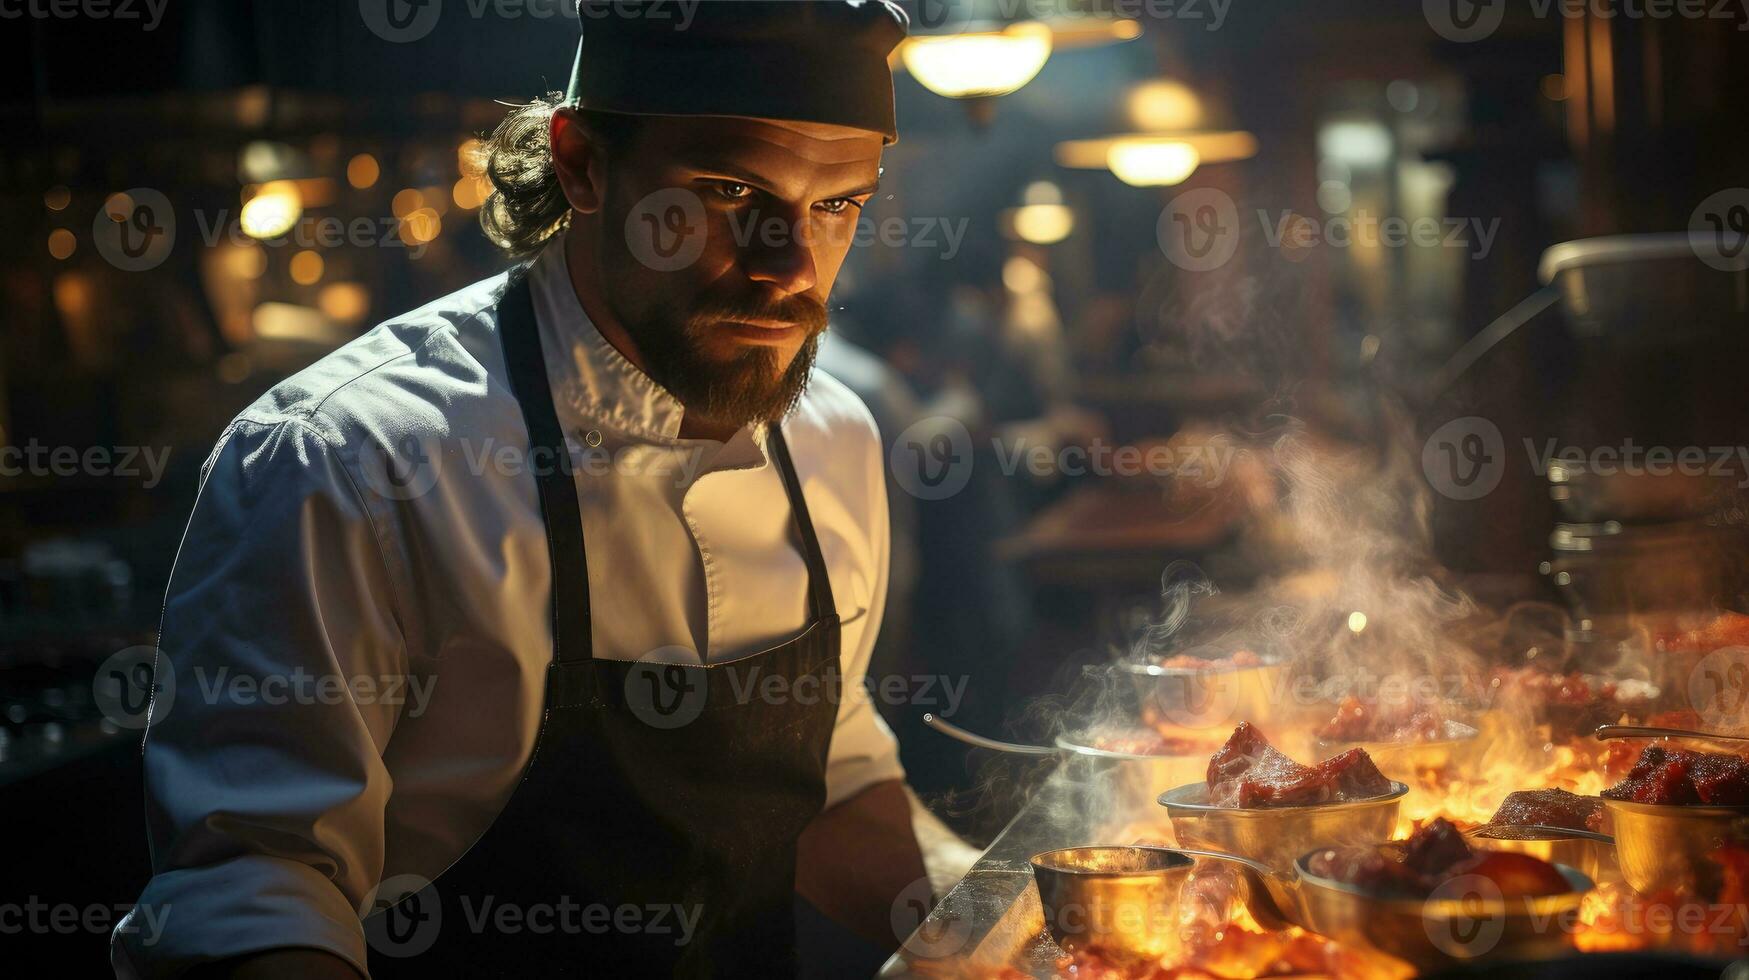 Dedicated Chef Mastering the Flames in Intense Kitchen Scene photo